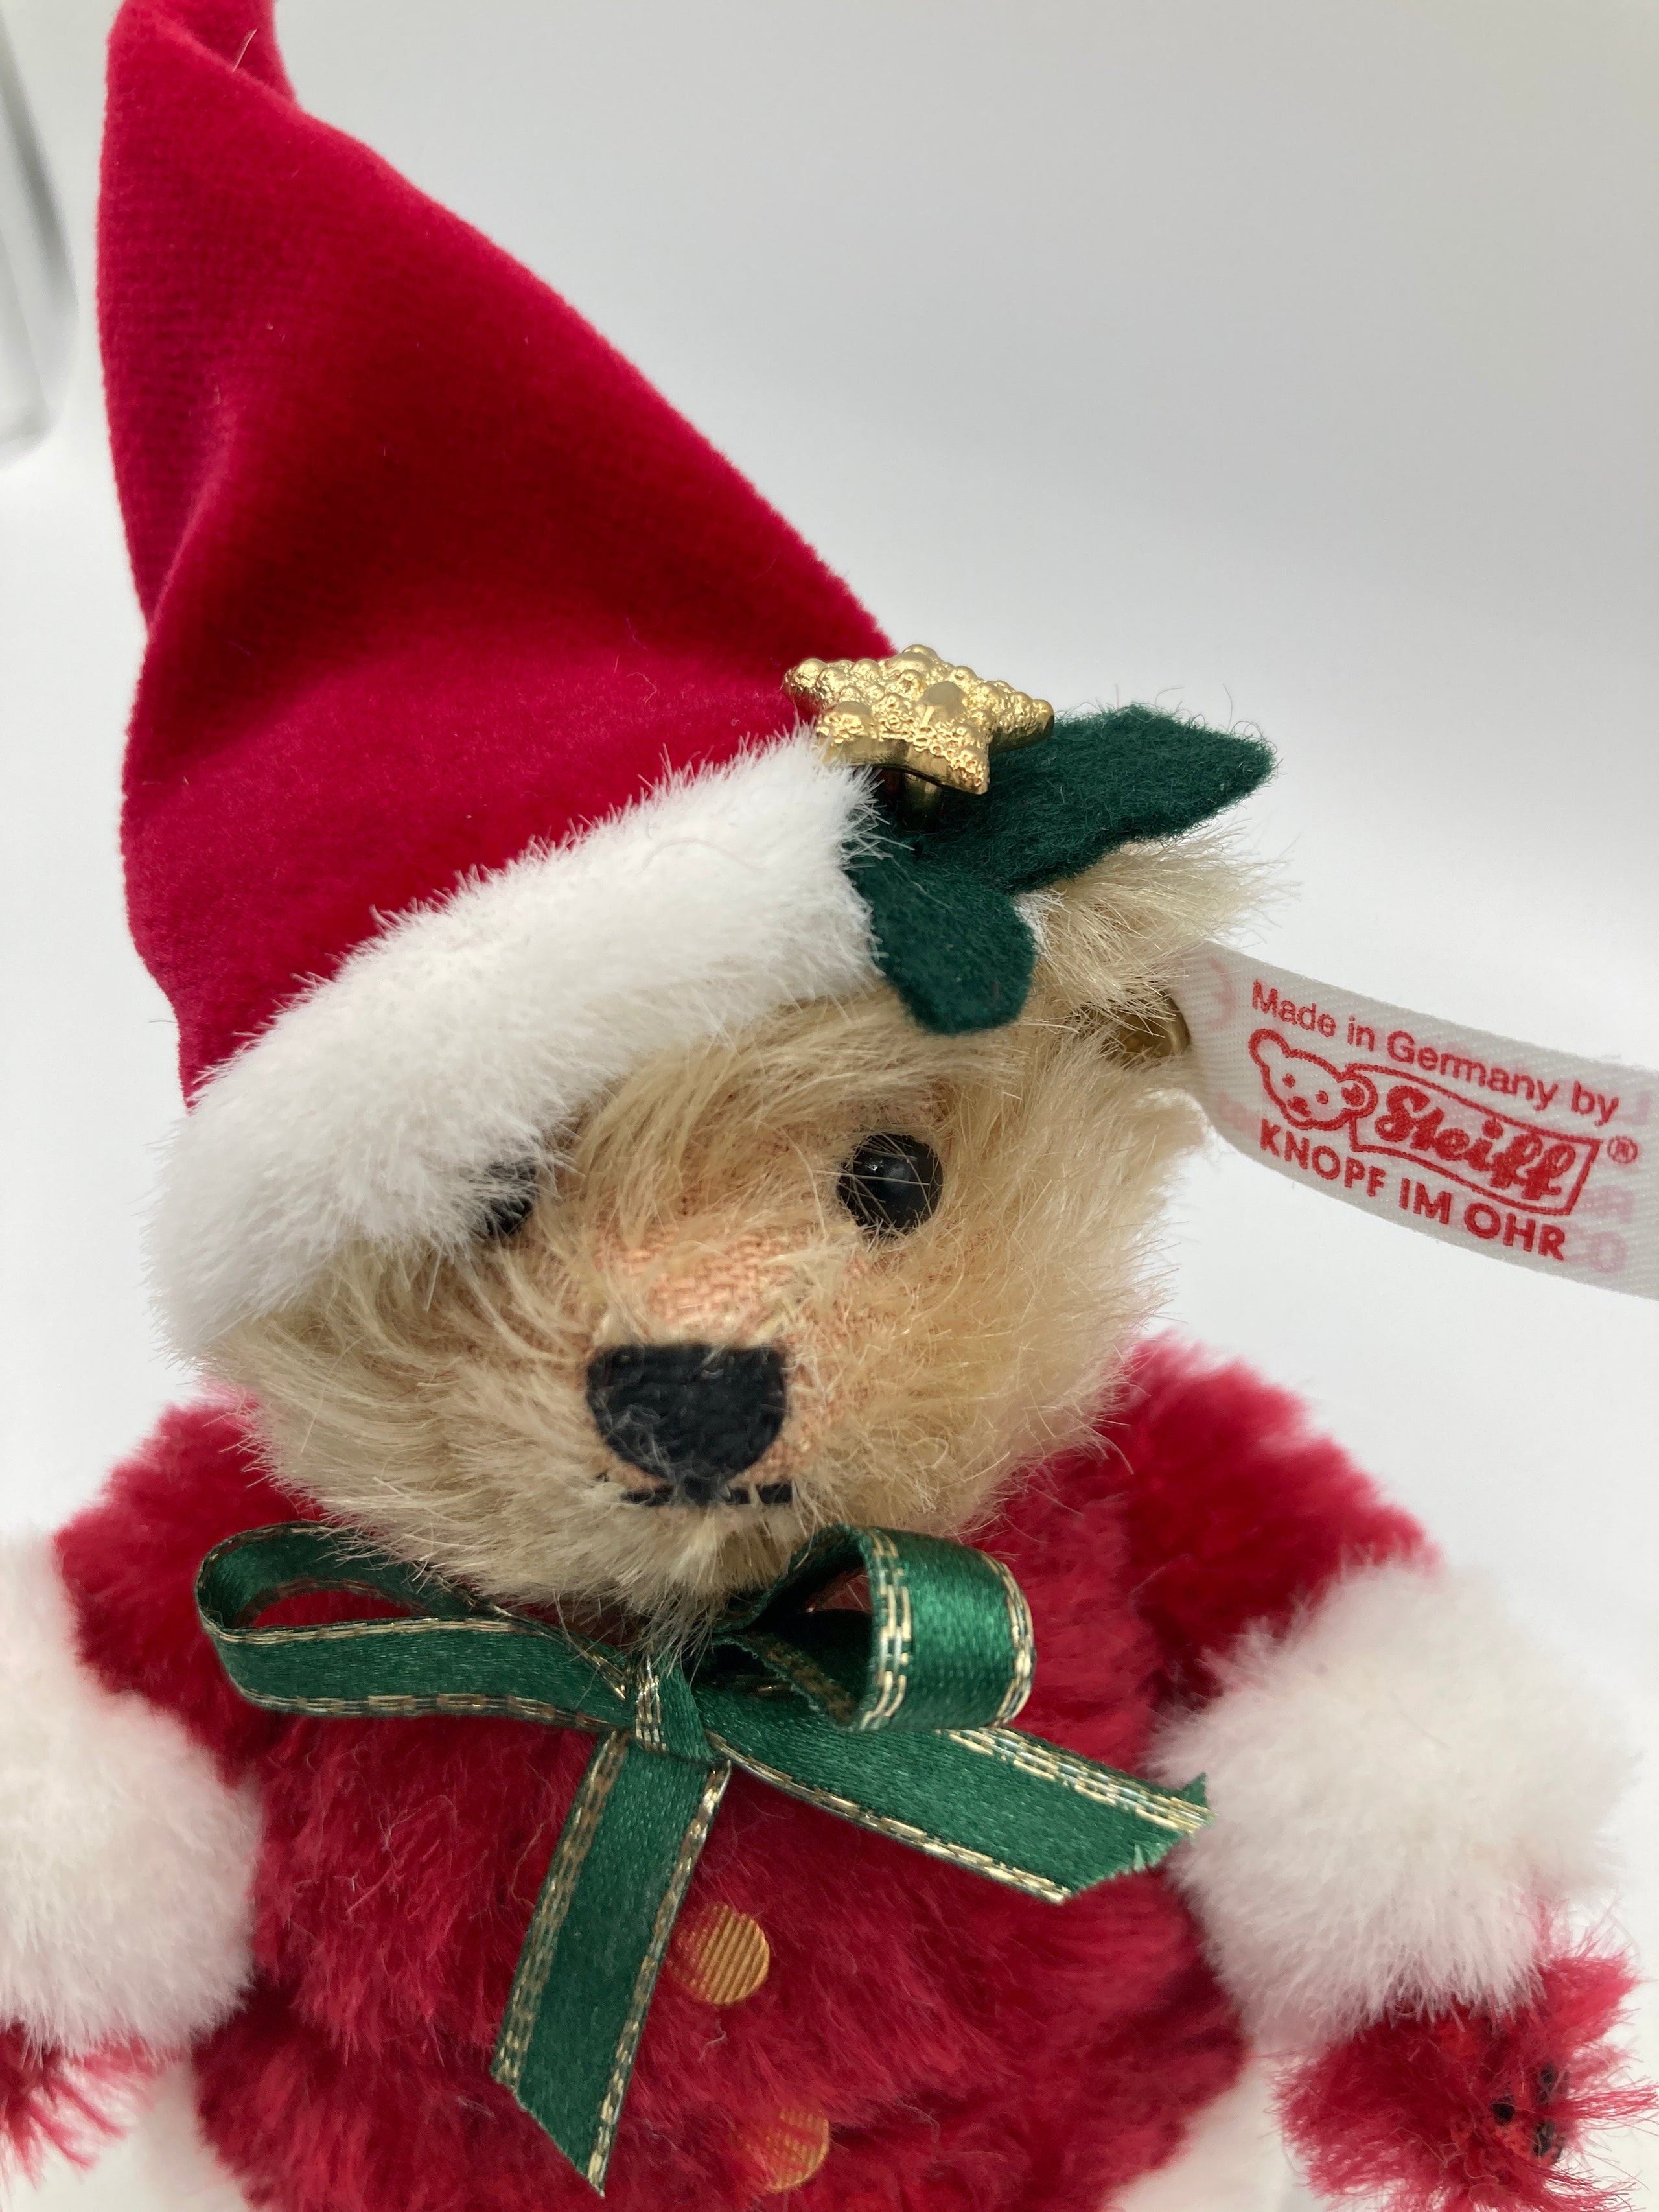 Steiff Limited Edition Roly Poly Santa Claus Bear With All IDs